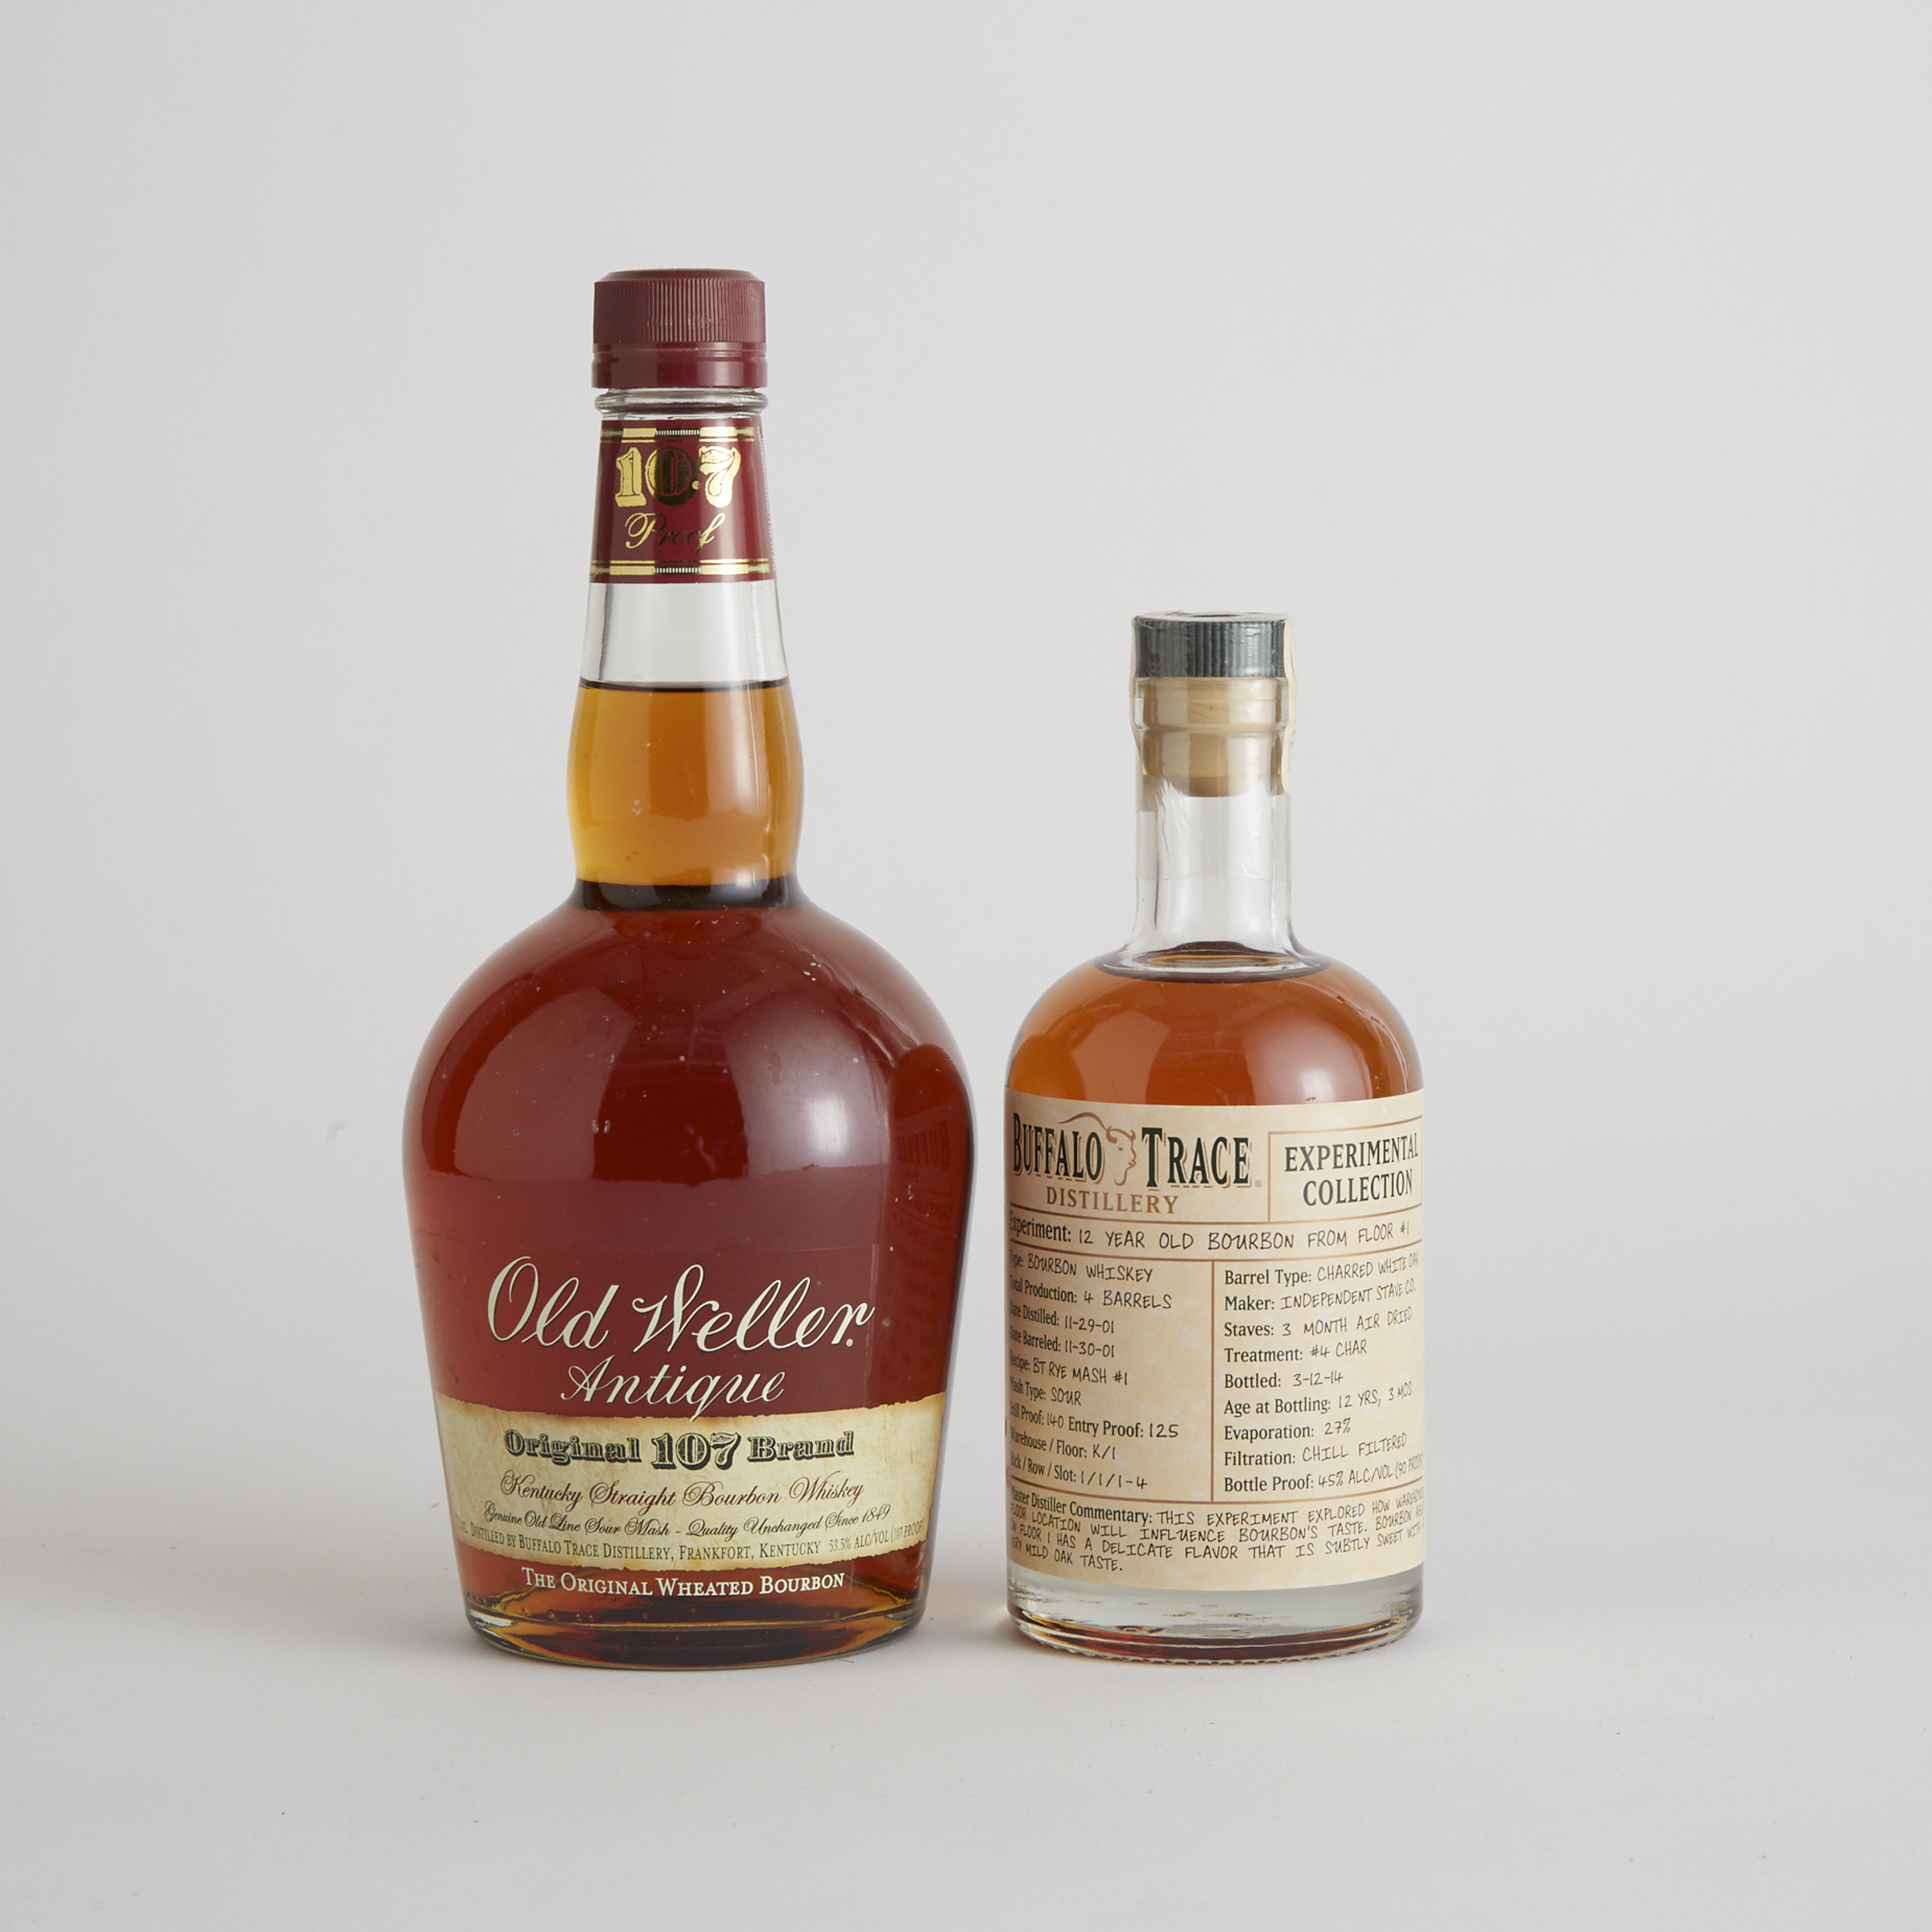 BUFFALO TRACE EXPERIMENTAL COLLECTION BOURBON 12 YEARS (ONE 375 ML)
OLD WELLERS ANTIQUE 107 BRAND KENTUCKY STRAIGHT BOURBON WHISKEY NAS (ONE 750 ML)